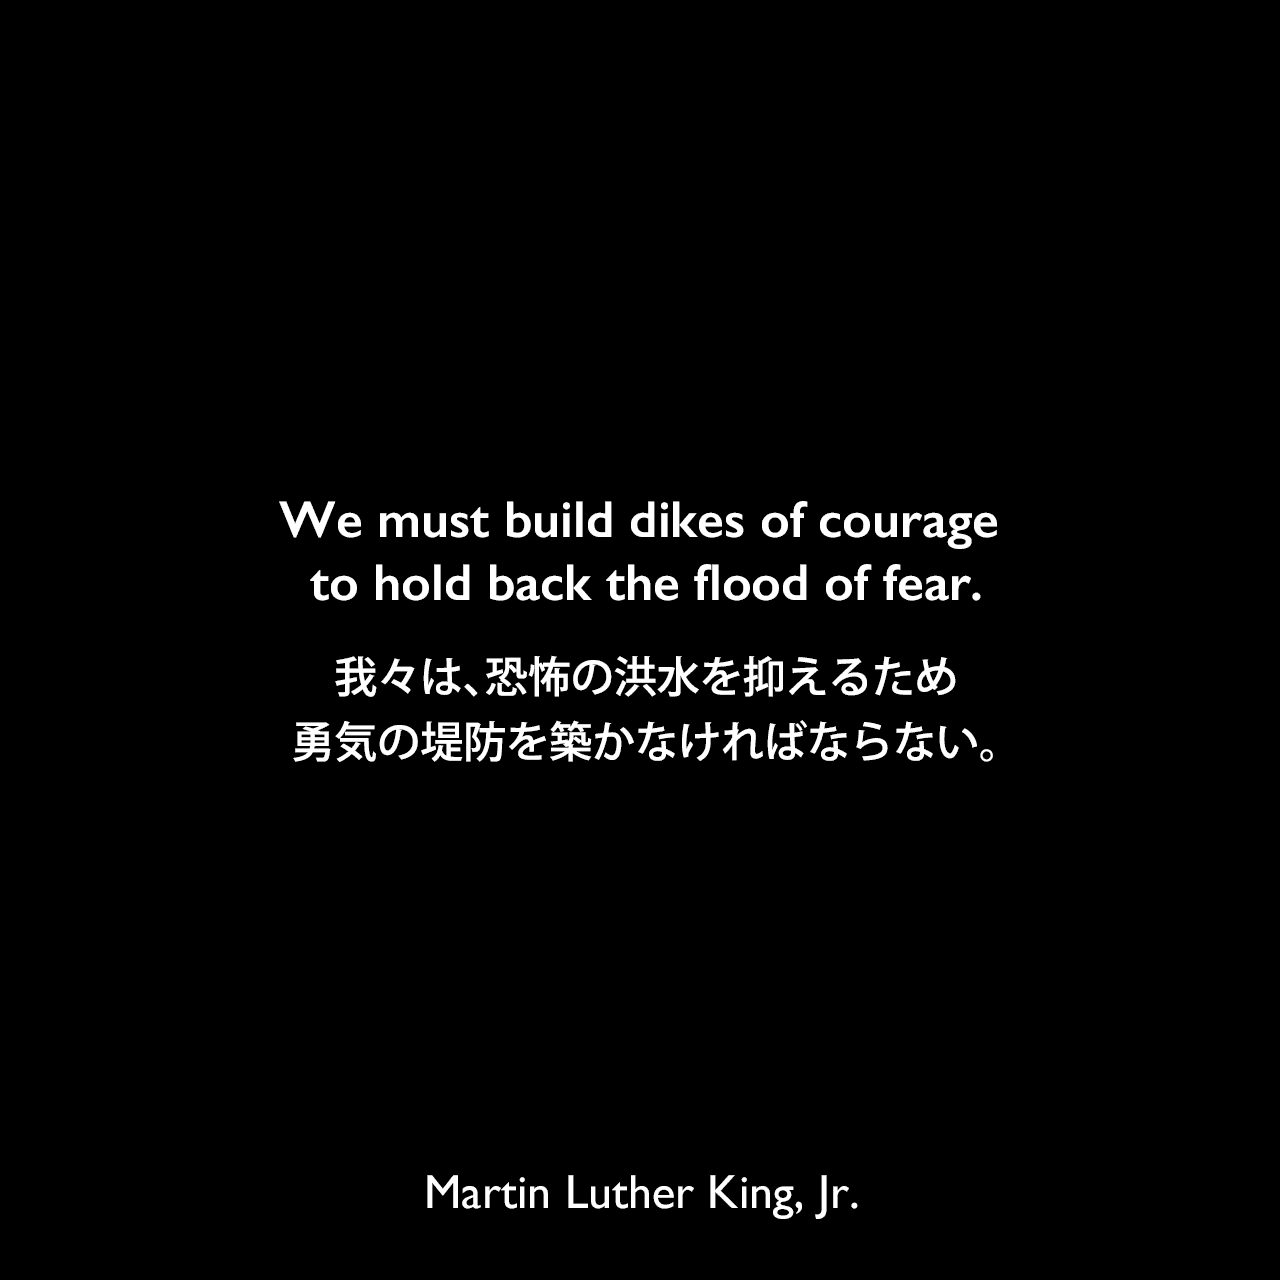 We must build dikes of courage to hold back the flood of fear.我々は、恐怖の洪水を抑えるため勇気の堤防を築かなければならない。Martin Luther King, Jr.